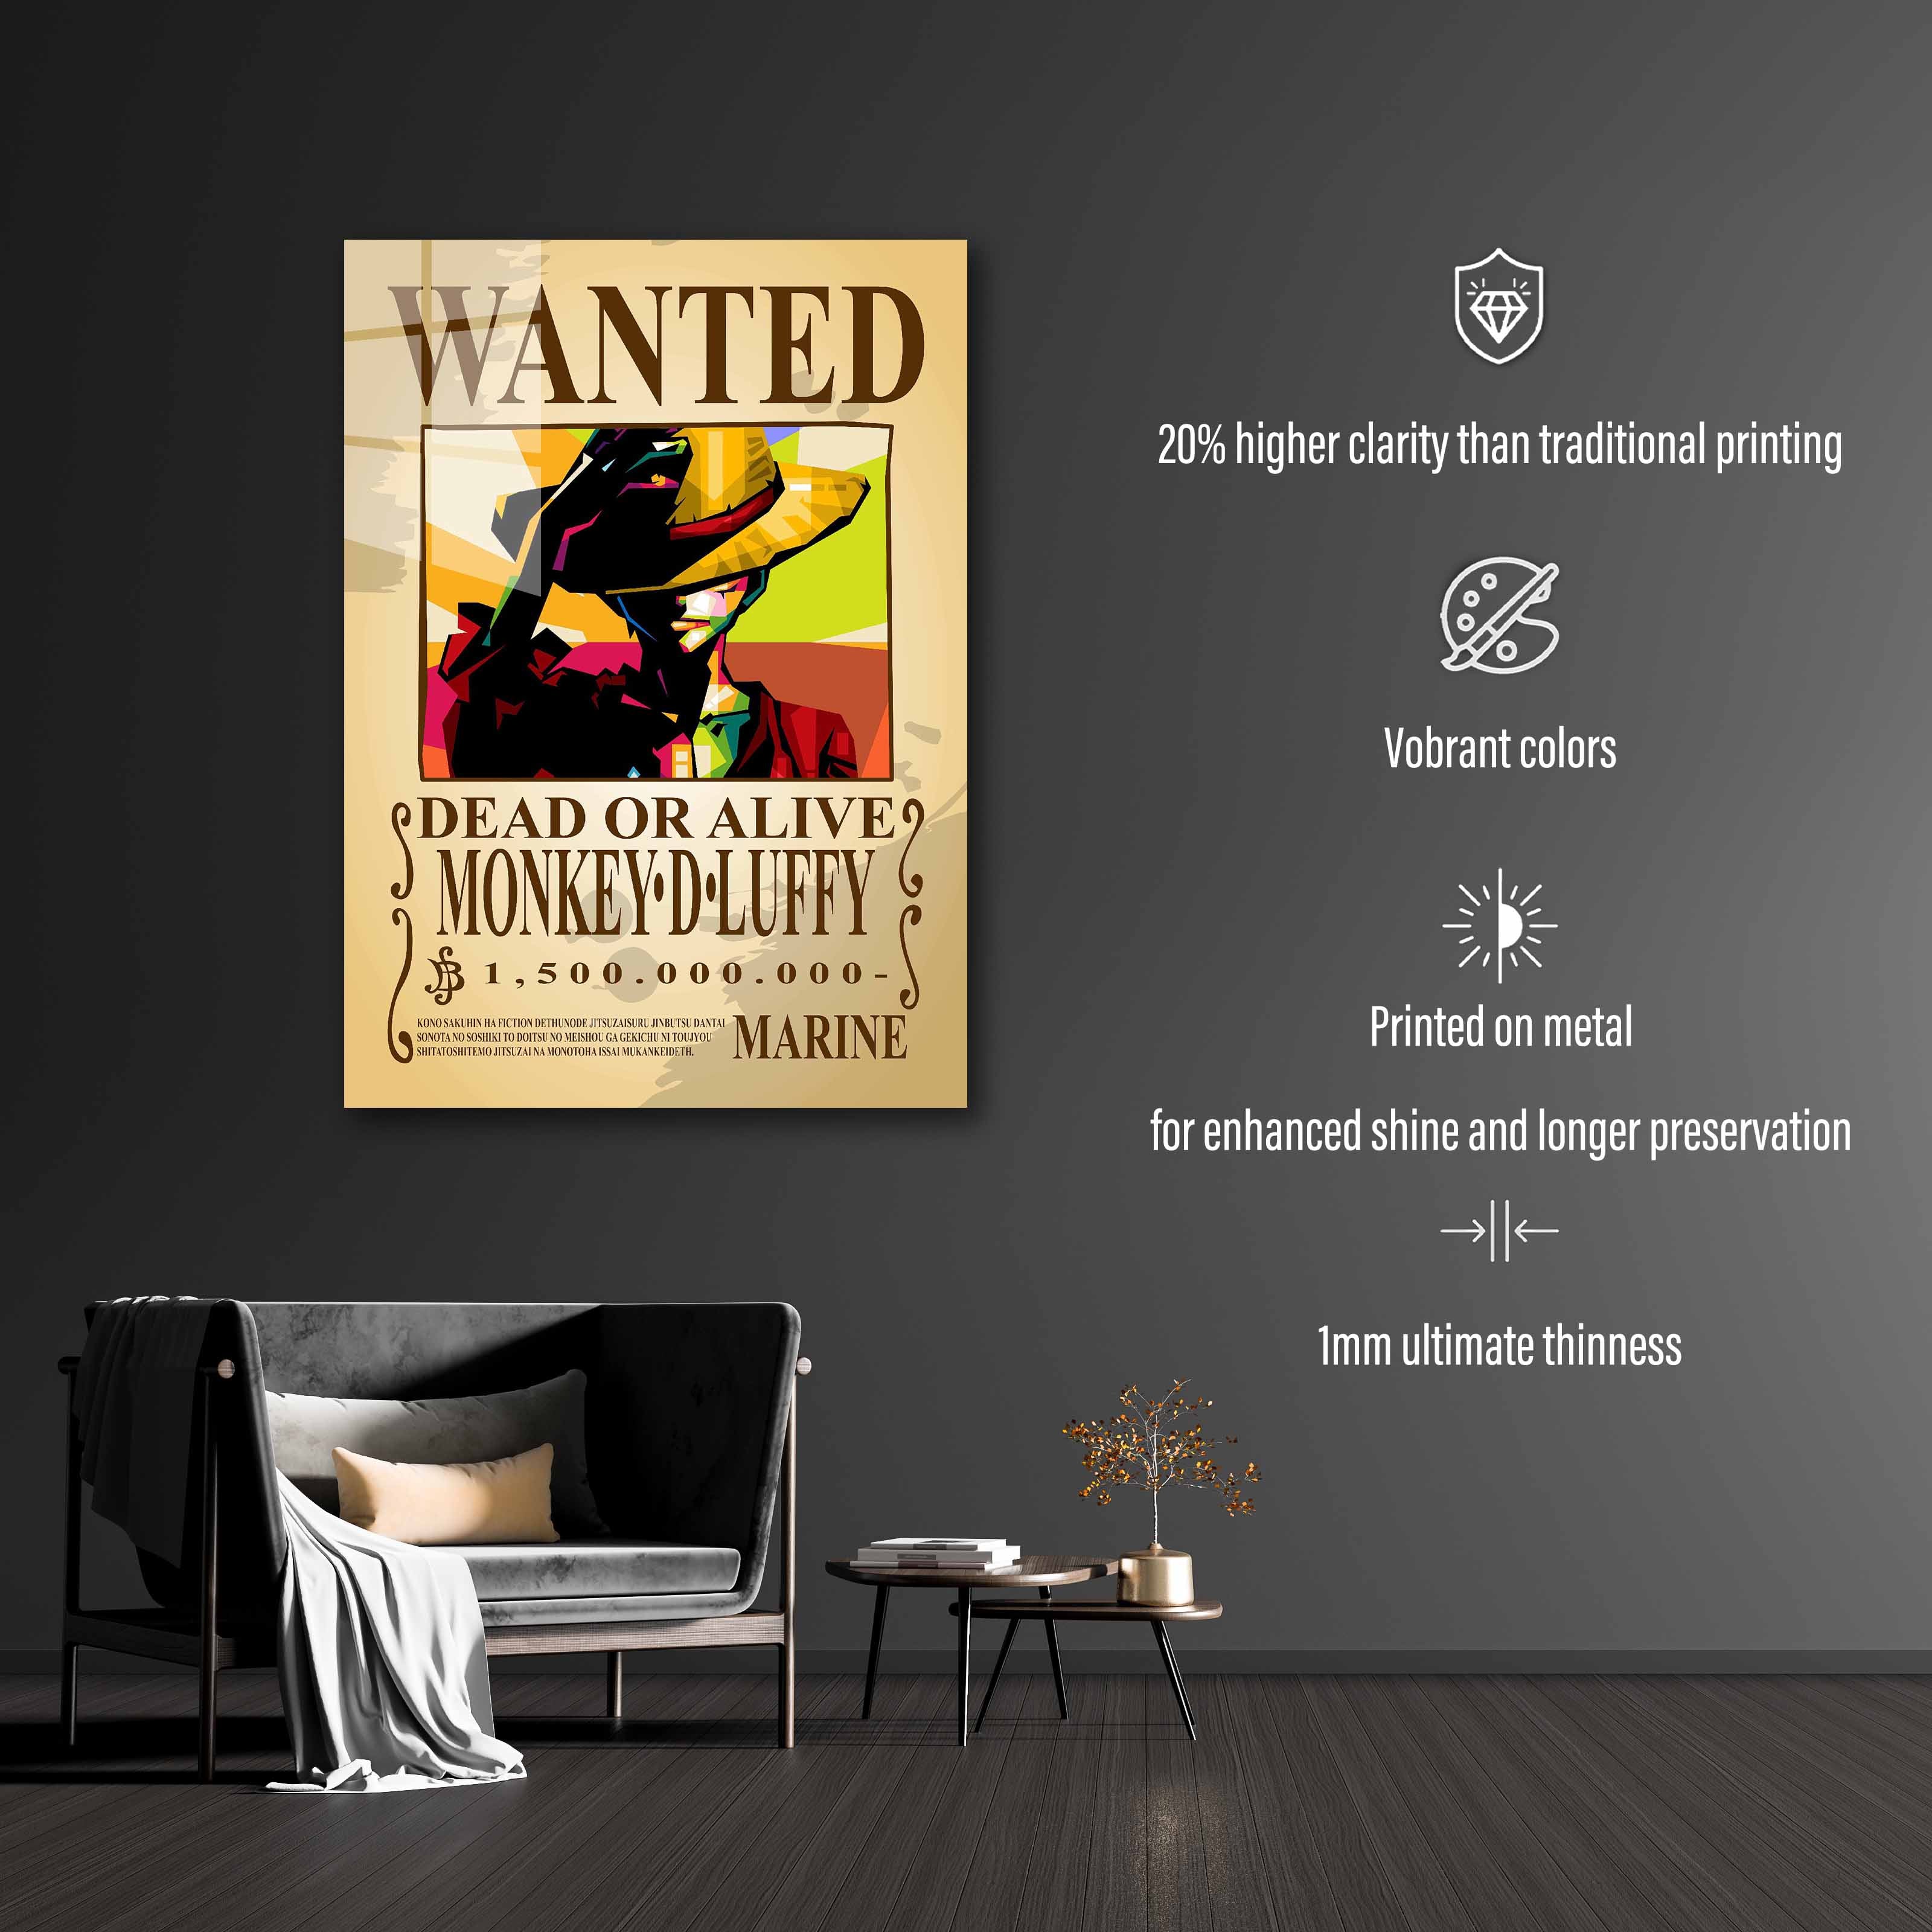 Wanted luffy poster-designed by @Doublede Design